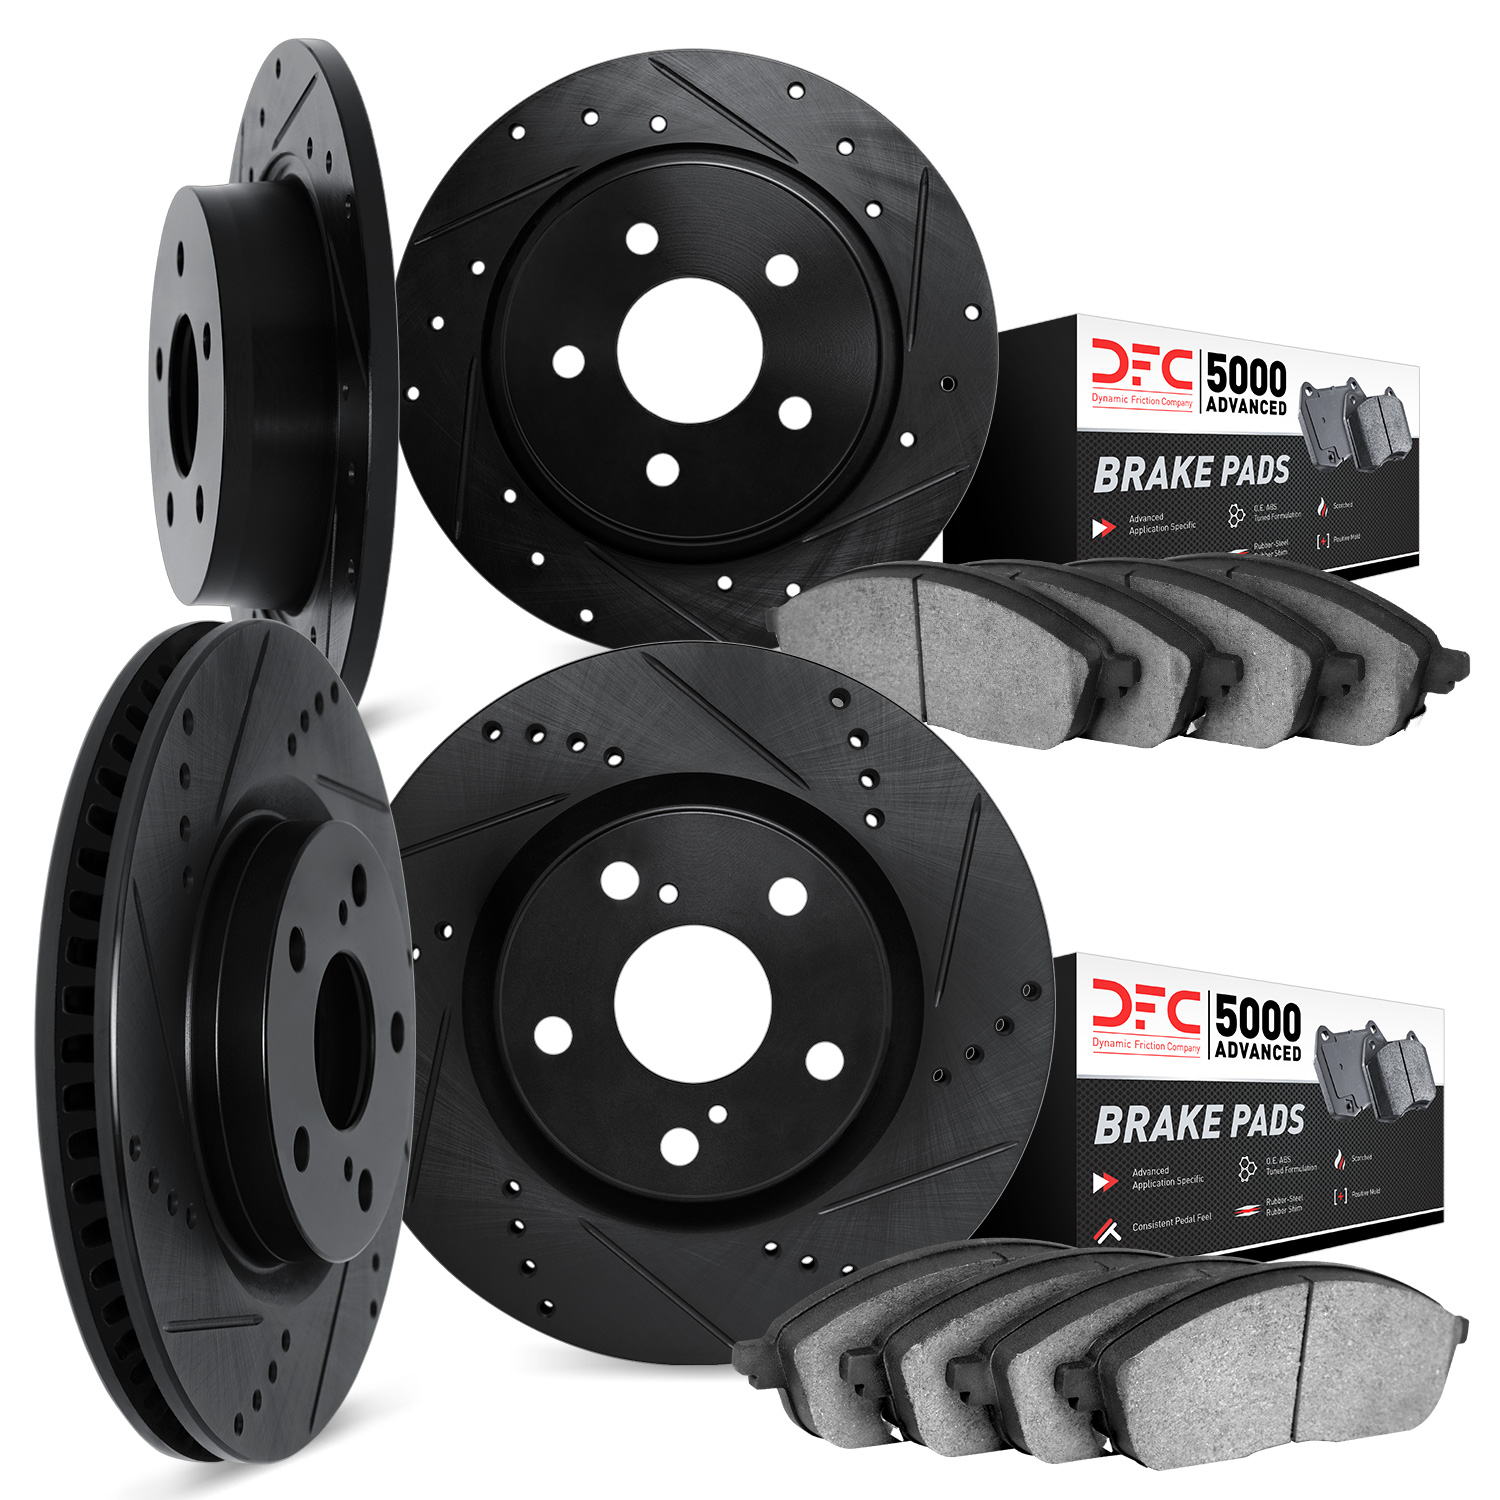 8504-11007 Drilled/Slotted Brake Rotors w/5000 Advanced Brake Pads Kit [Black], 2003-2005 Land Rover, Position: Front and Rear